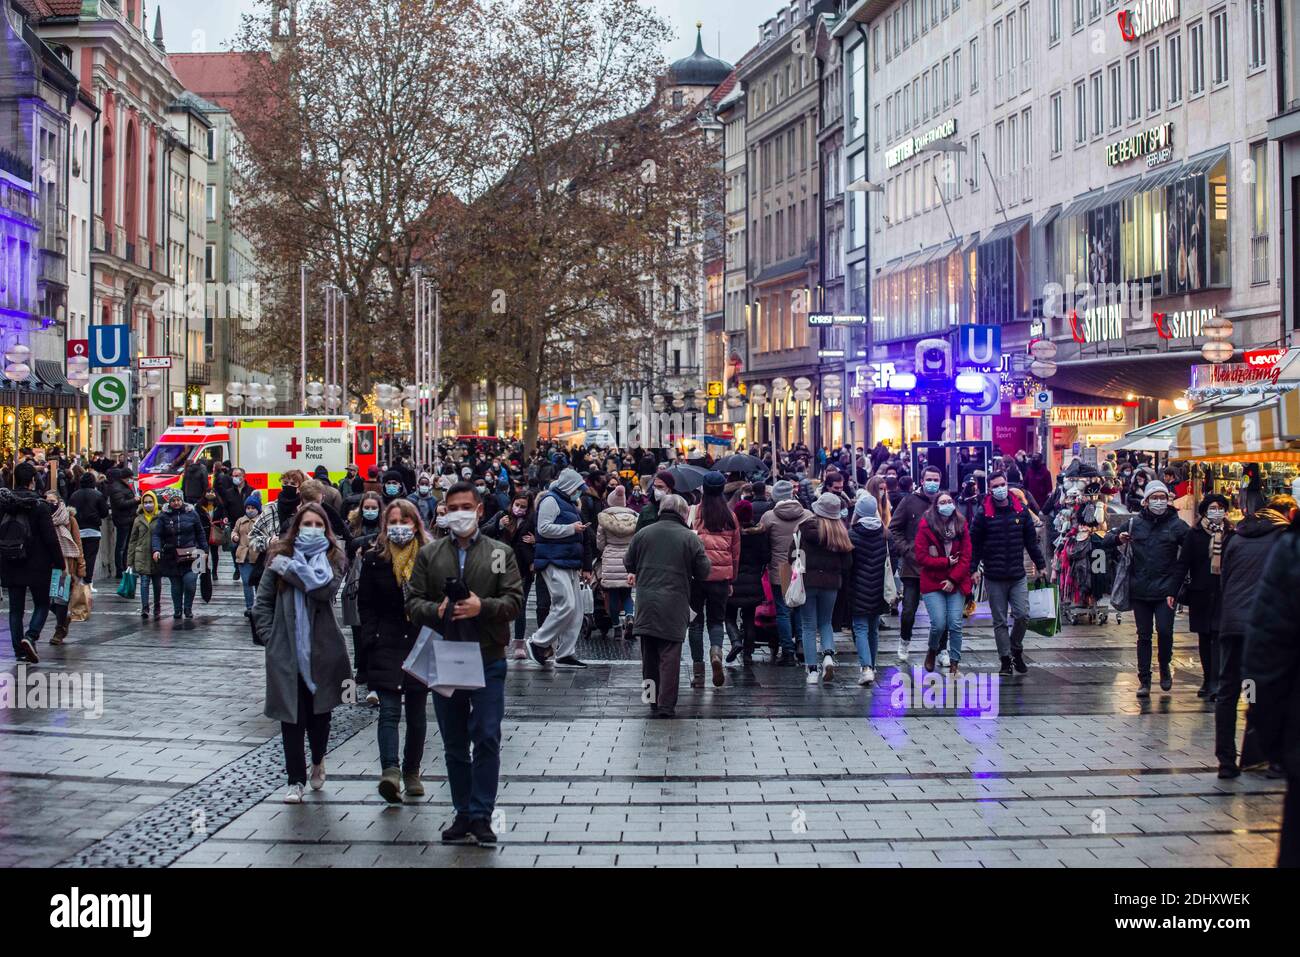 Munich, Bavaria, Germany. 12th Dec, 2020. Shoppers in Munich, Germany crowd the pedestrian zone in the inner city on the eve of a meeting between Chancellor Angela Merkel and the Minister-Presidents of the German states on Sunday. The expectation is a national lockdown in Germany that will be lifted, at earliest, on January 10th. Despite a partial lockdown, the new infections of Coronavirus have steadily risen and lack of compliance with distancing and mask regulations are apparent. Credit: Sachelle Babbar/ZUMA Wire/Alamy Live News Stock Photo